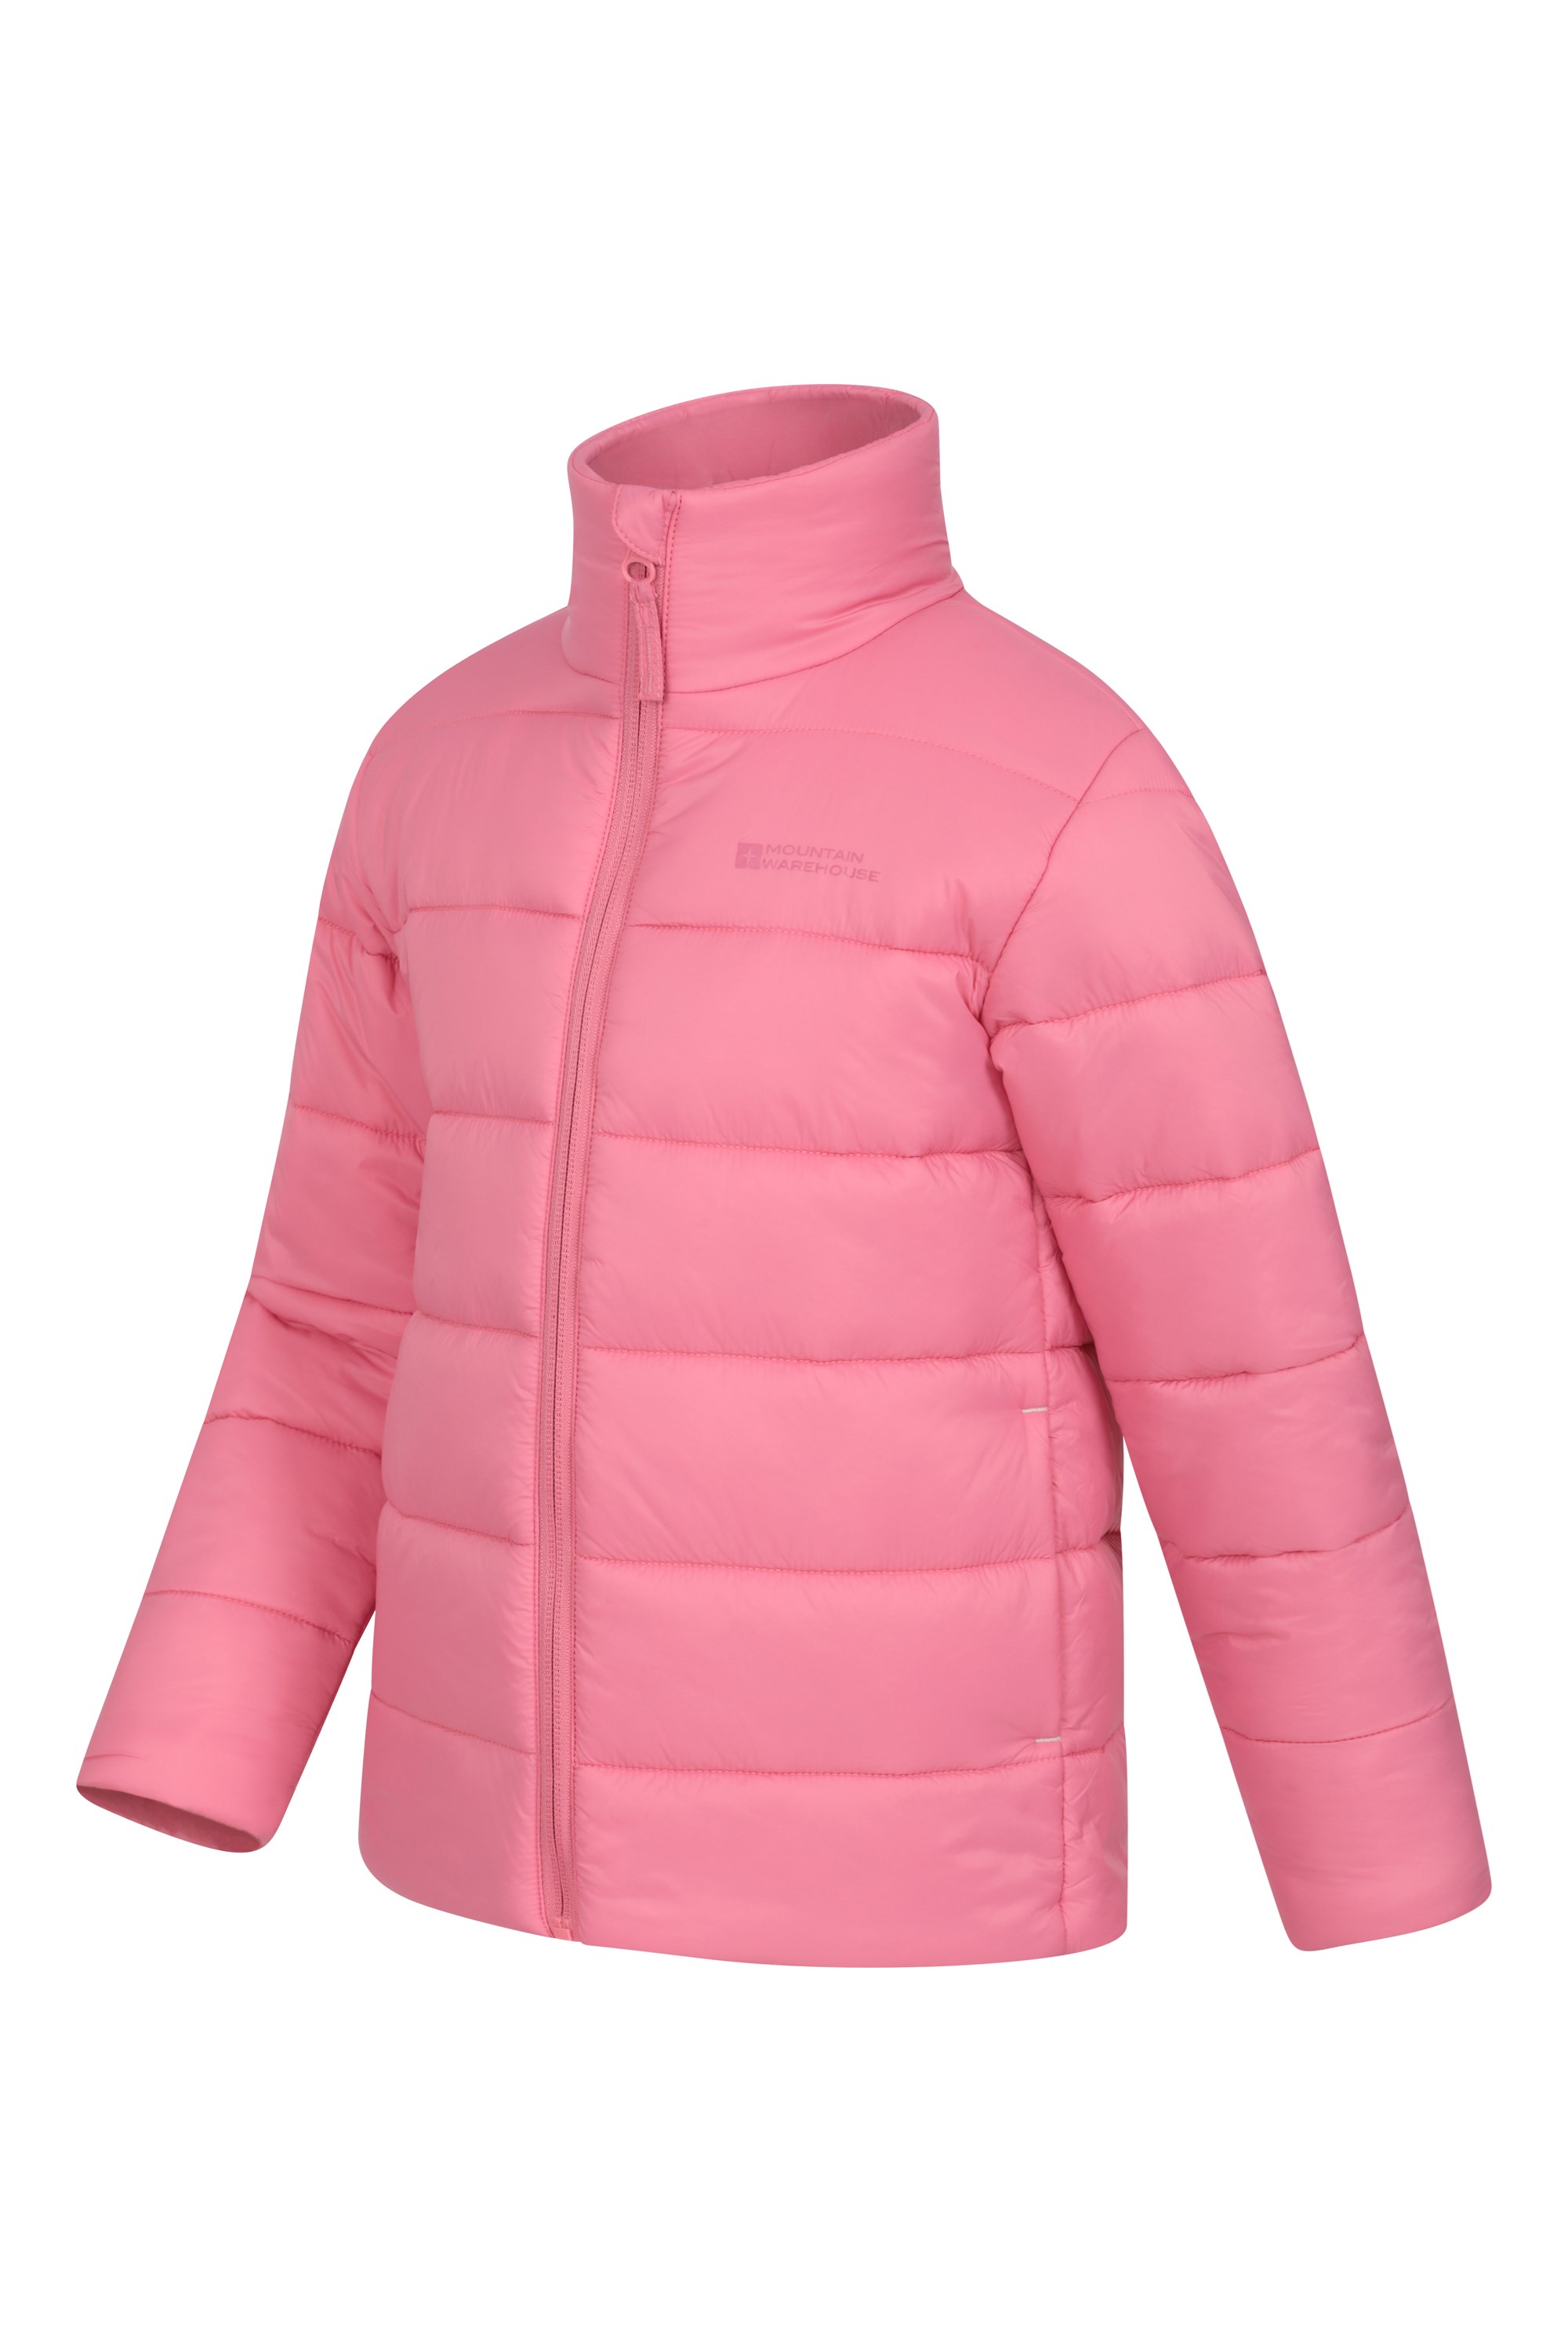 Padded Insulation Side Pockets Mountain Warehouse Grove Kids Unisex Water Resistant Jacket Microfibre Filling Best for Winter & Outdoors Girls & Boys Raincoat